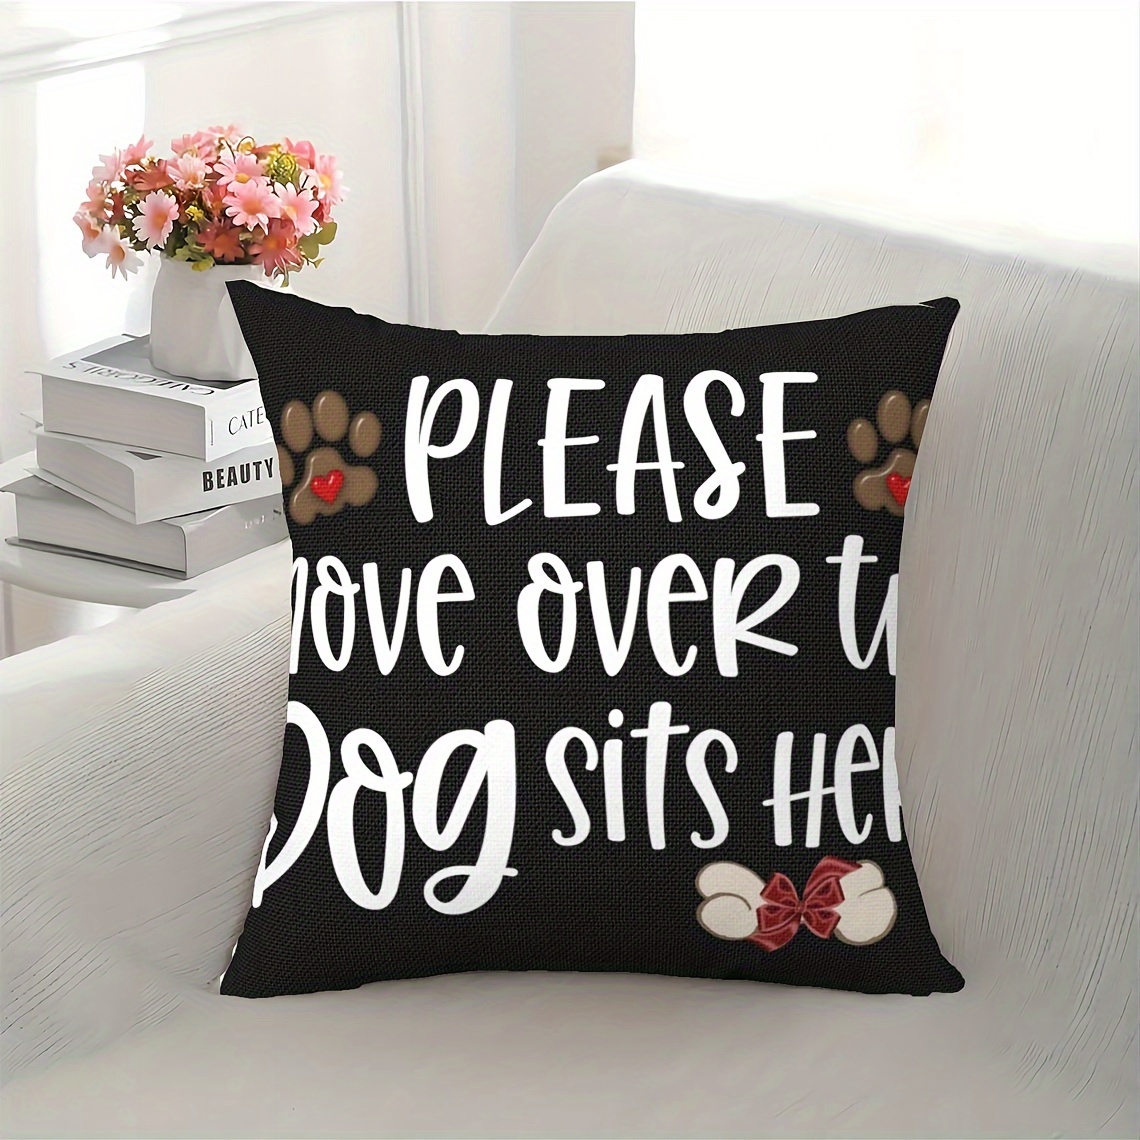 

1pc Decorative Throw Pillow Cases, Dog Pillow Covers, Please Move Over The Dog Sits Here Throw Pillow Cases, Gift For Dog Lover, Dog Lover Gift Short Plush Decor 18x18 Inch Without Pillow Core